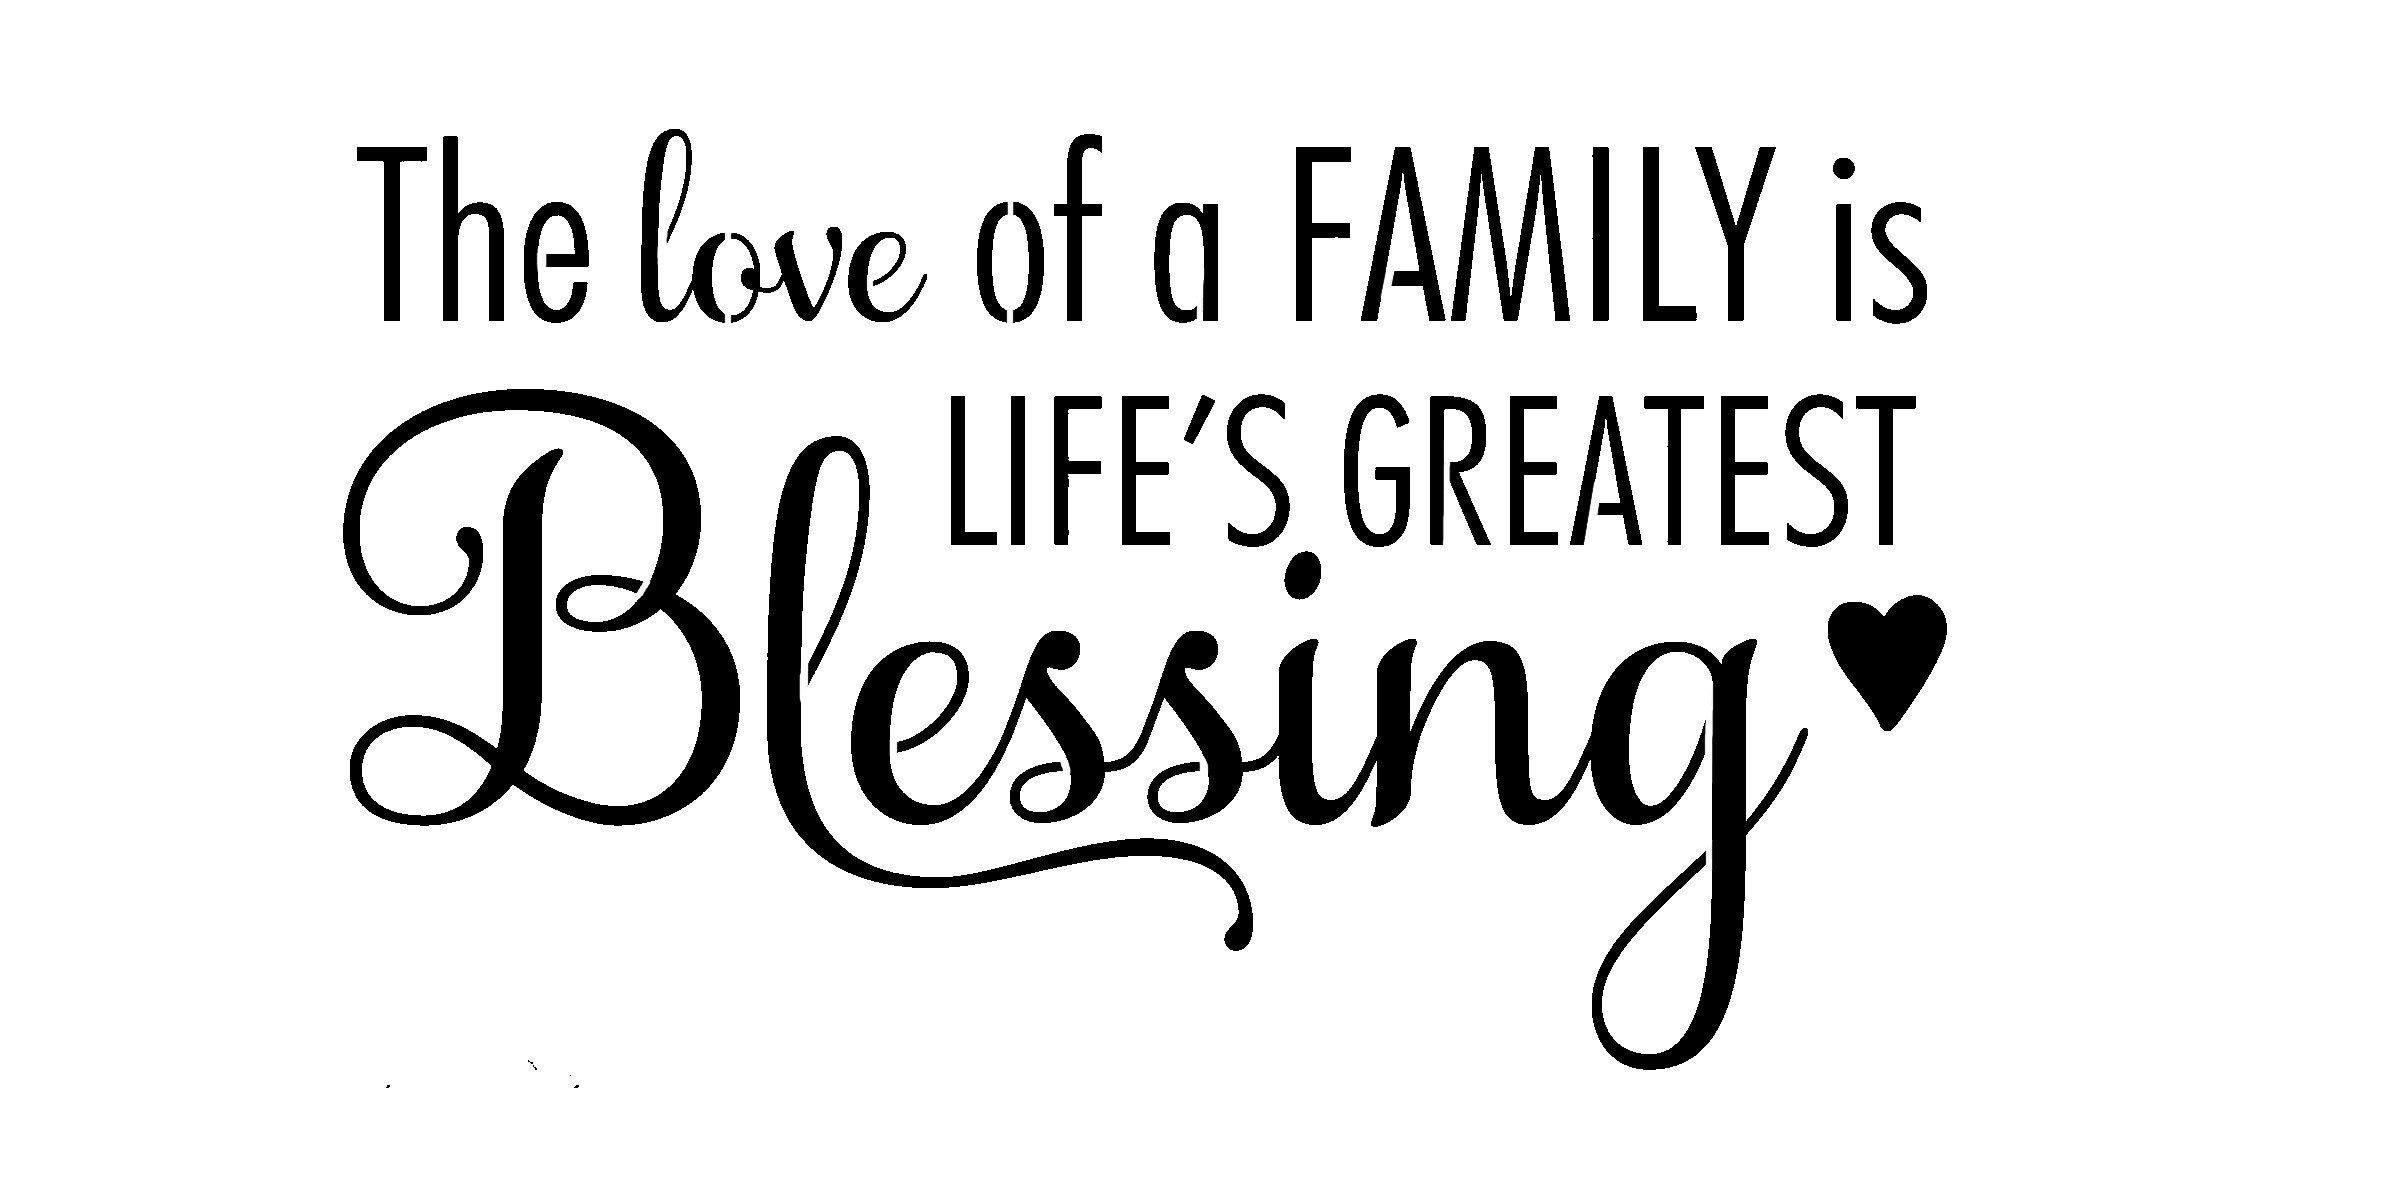 Family Blessings Quotes
 The love of a Family is Life s Greatest Blessing